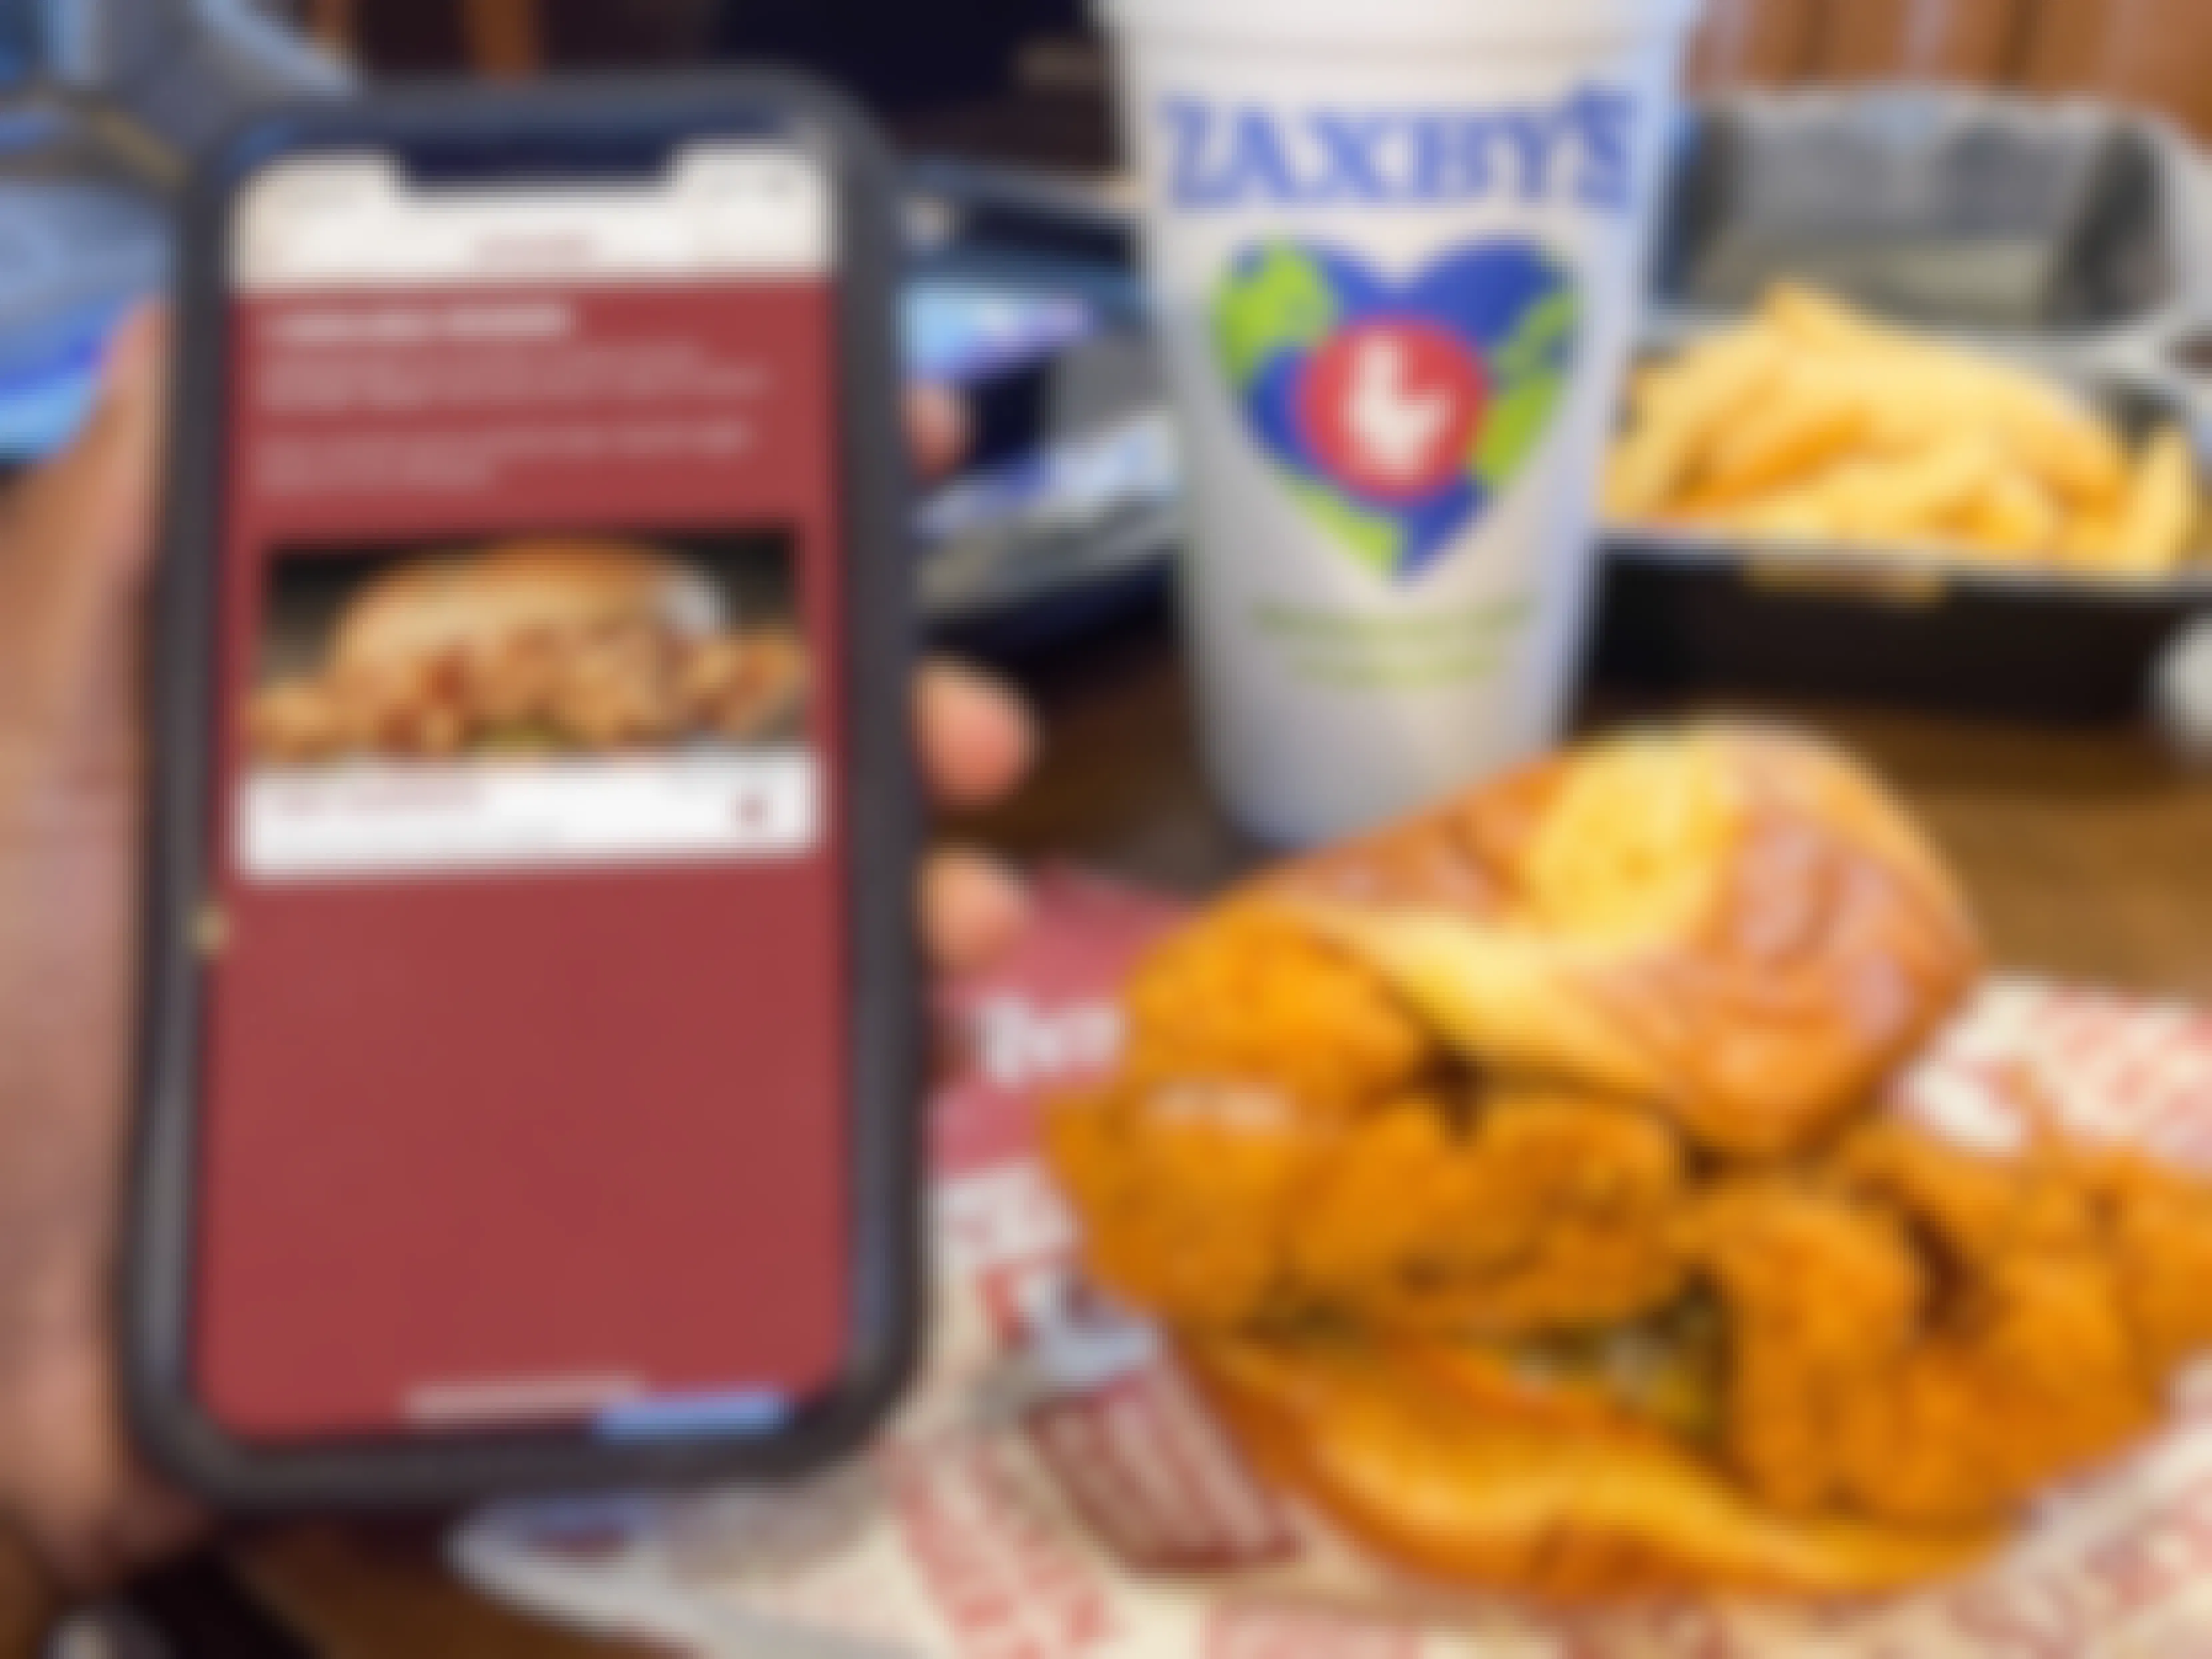 A person's hand holding a cell phone displaying the Rewards page of the Zaxby's app next to a chicken sandwich, a drink, and a box of fries on a table at Zaxby's.